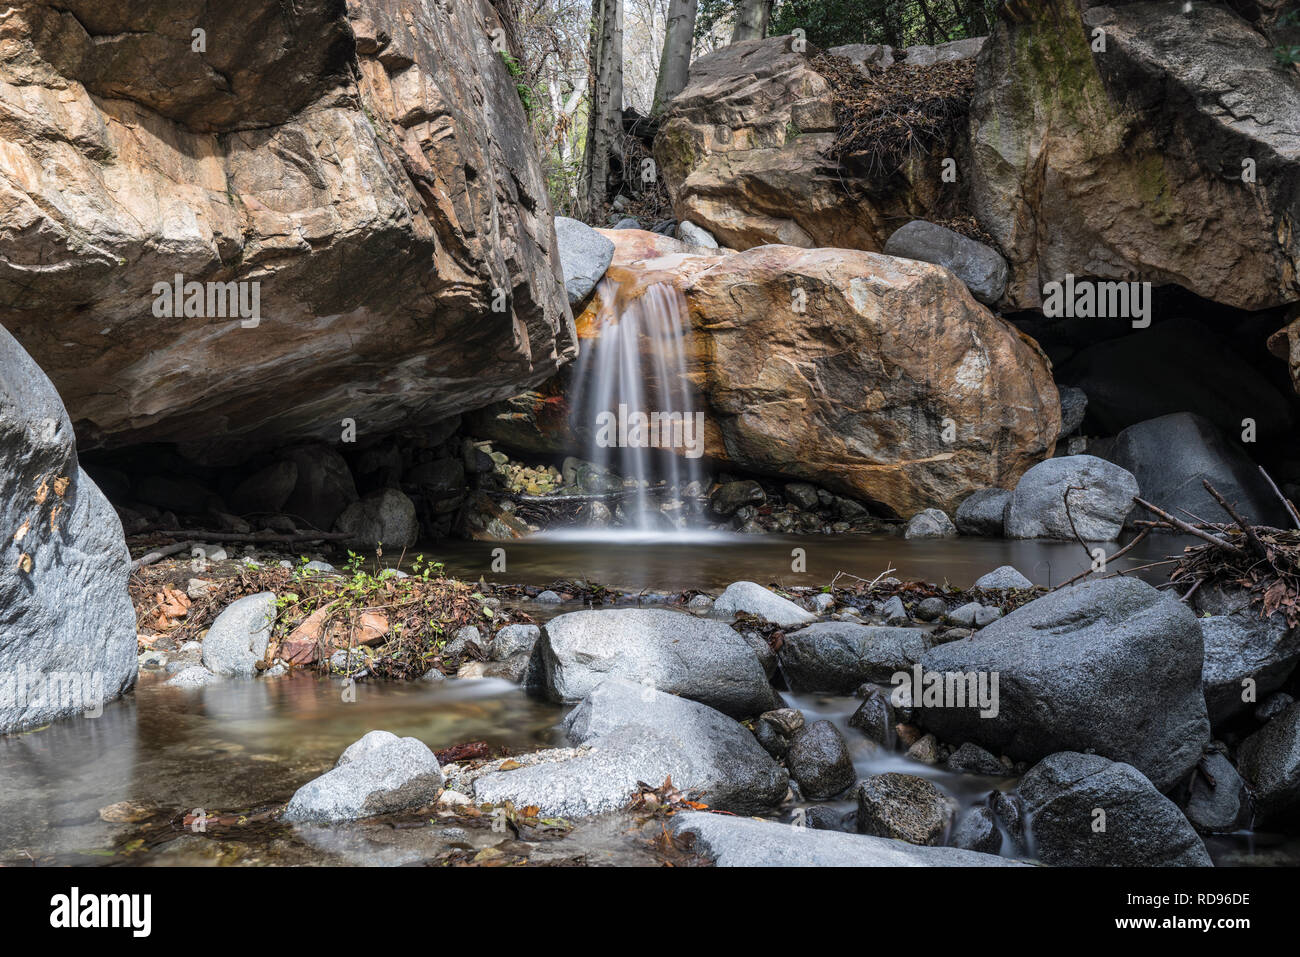 Idlehour falls and creek in the San Gabriel Mountains and Angeles National Forest above Los Angeles in Southern California. Stock Photo